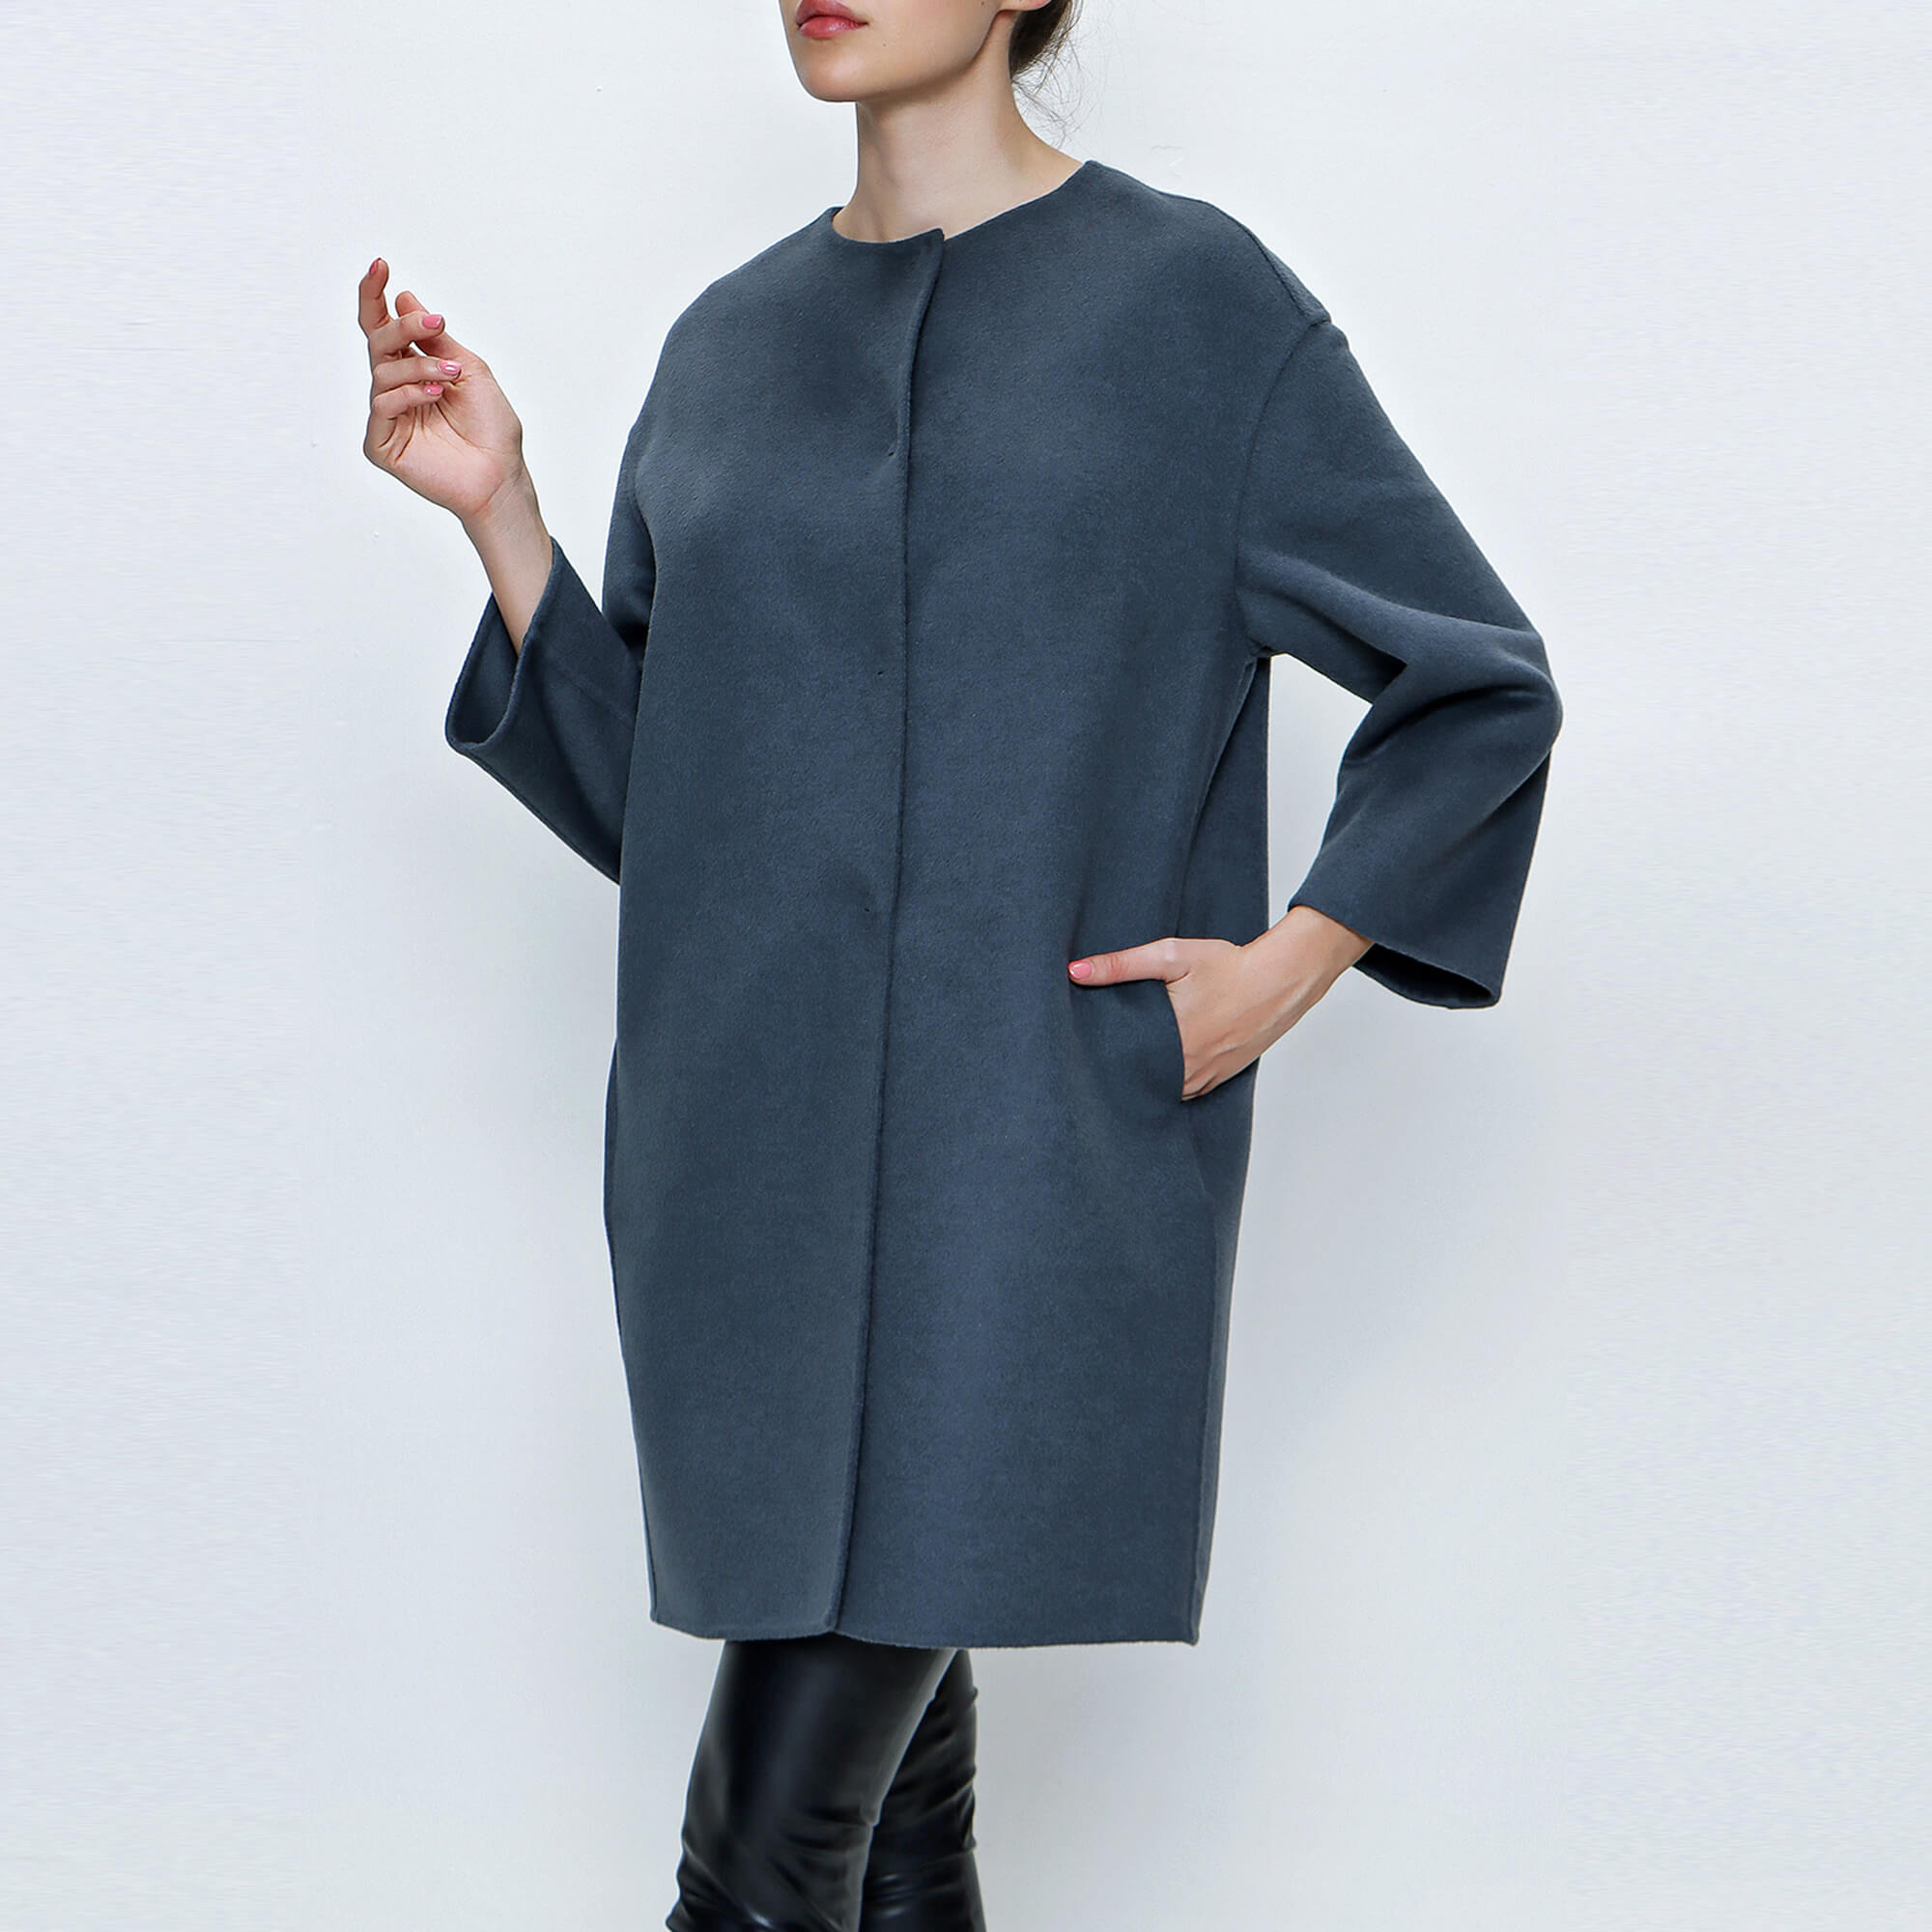 Prada - Deep Grey Wool and Cashmere Blend Cocoon Coat 